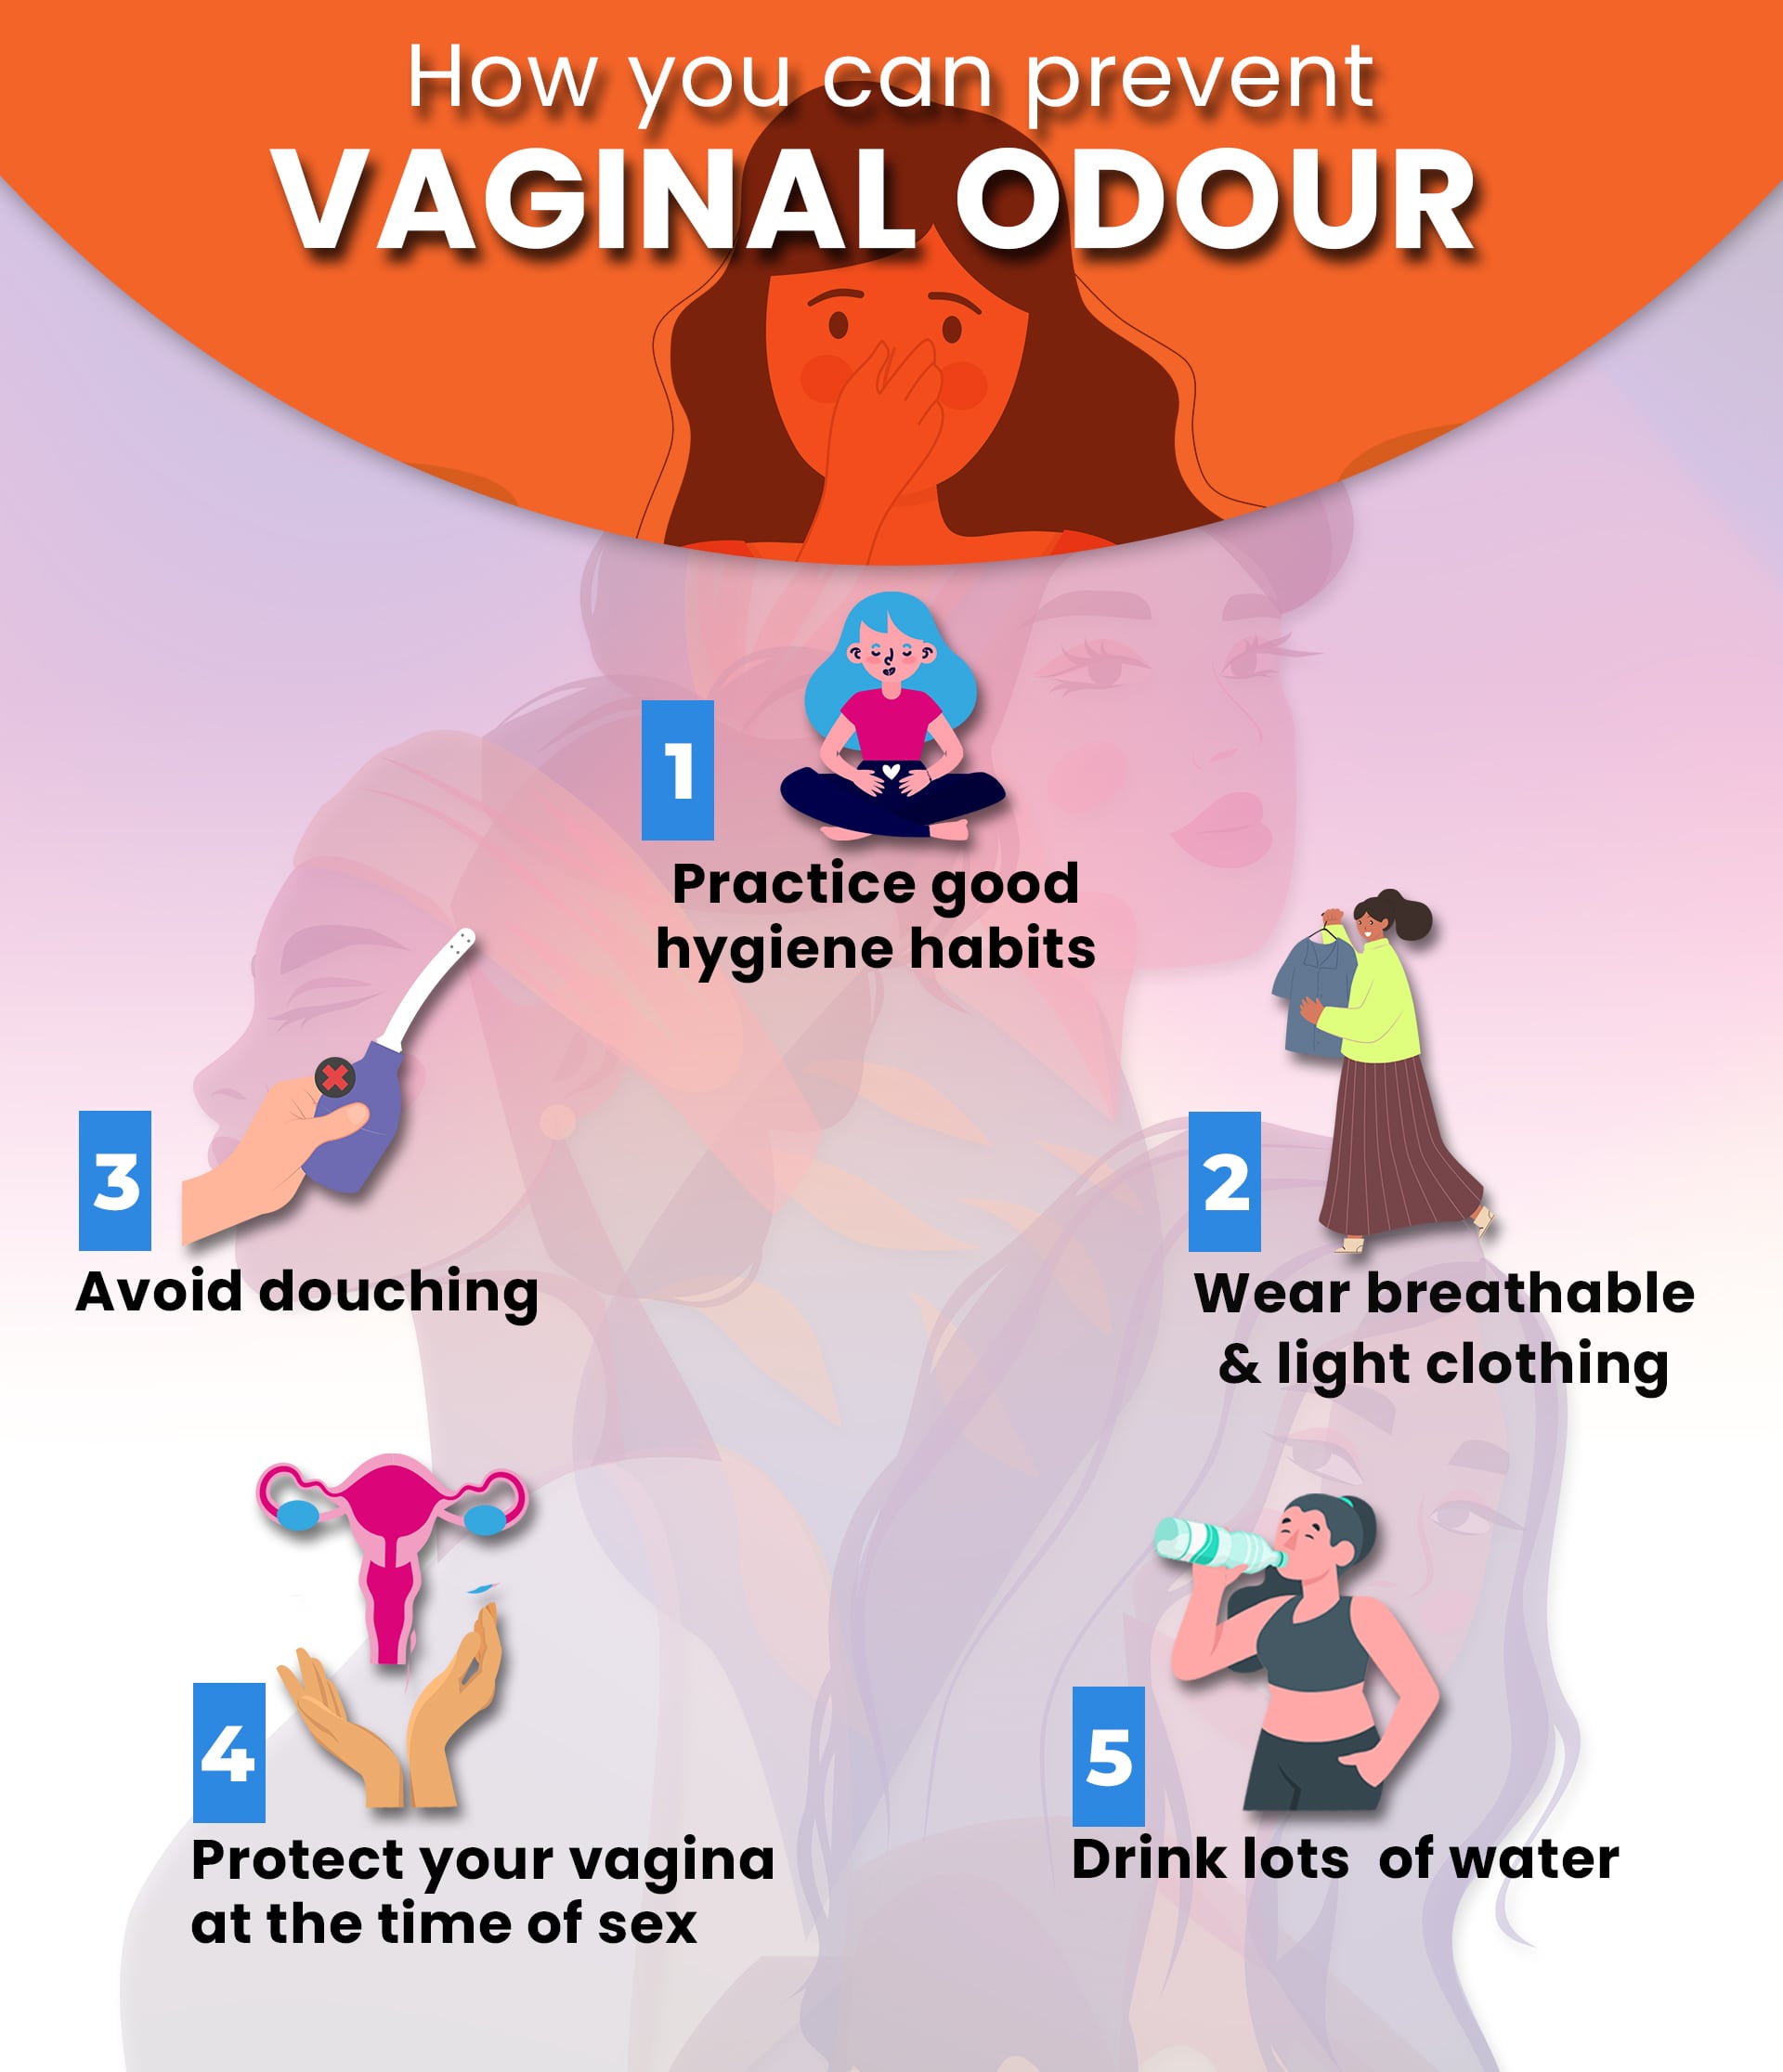 How you can prevent vaginal odour